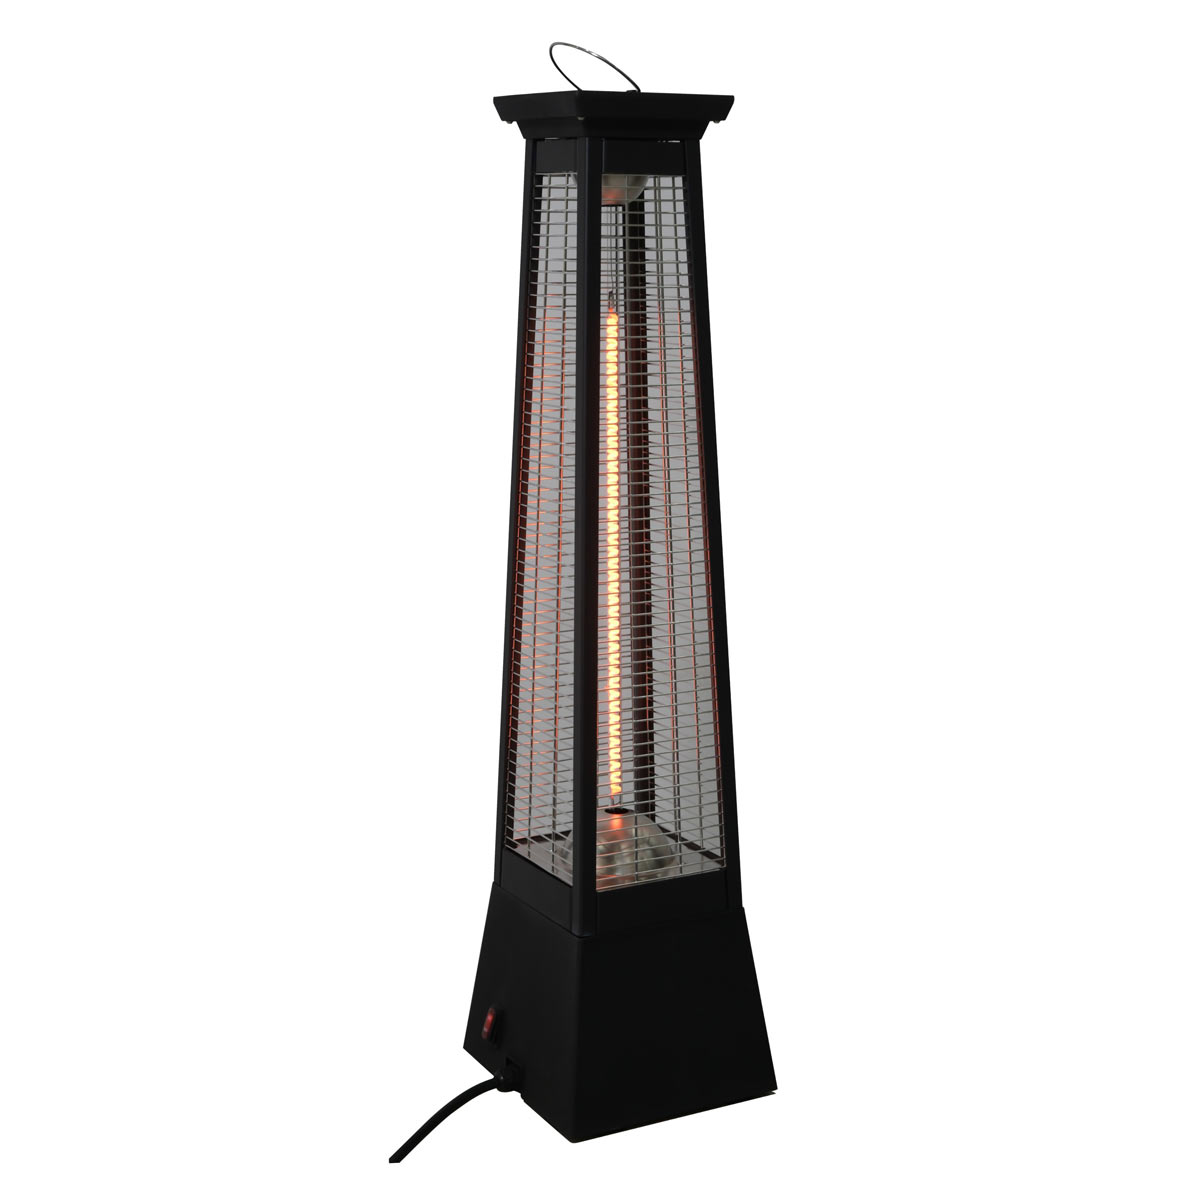 CPEH: climate plus volcano/pyramid electric heater